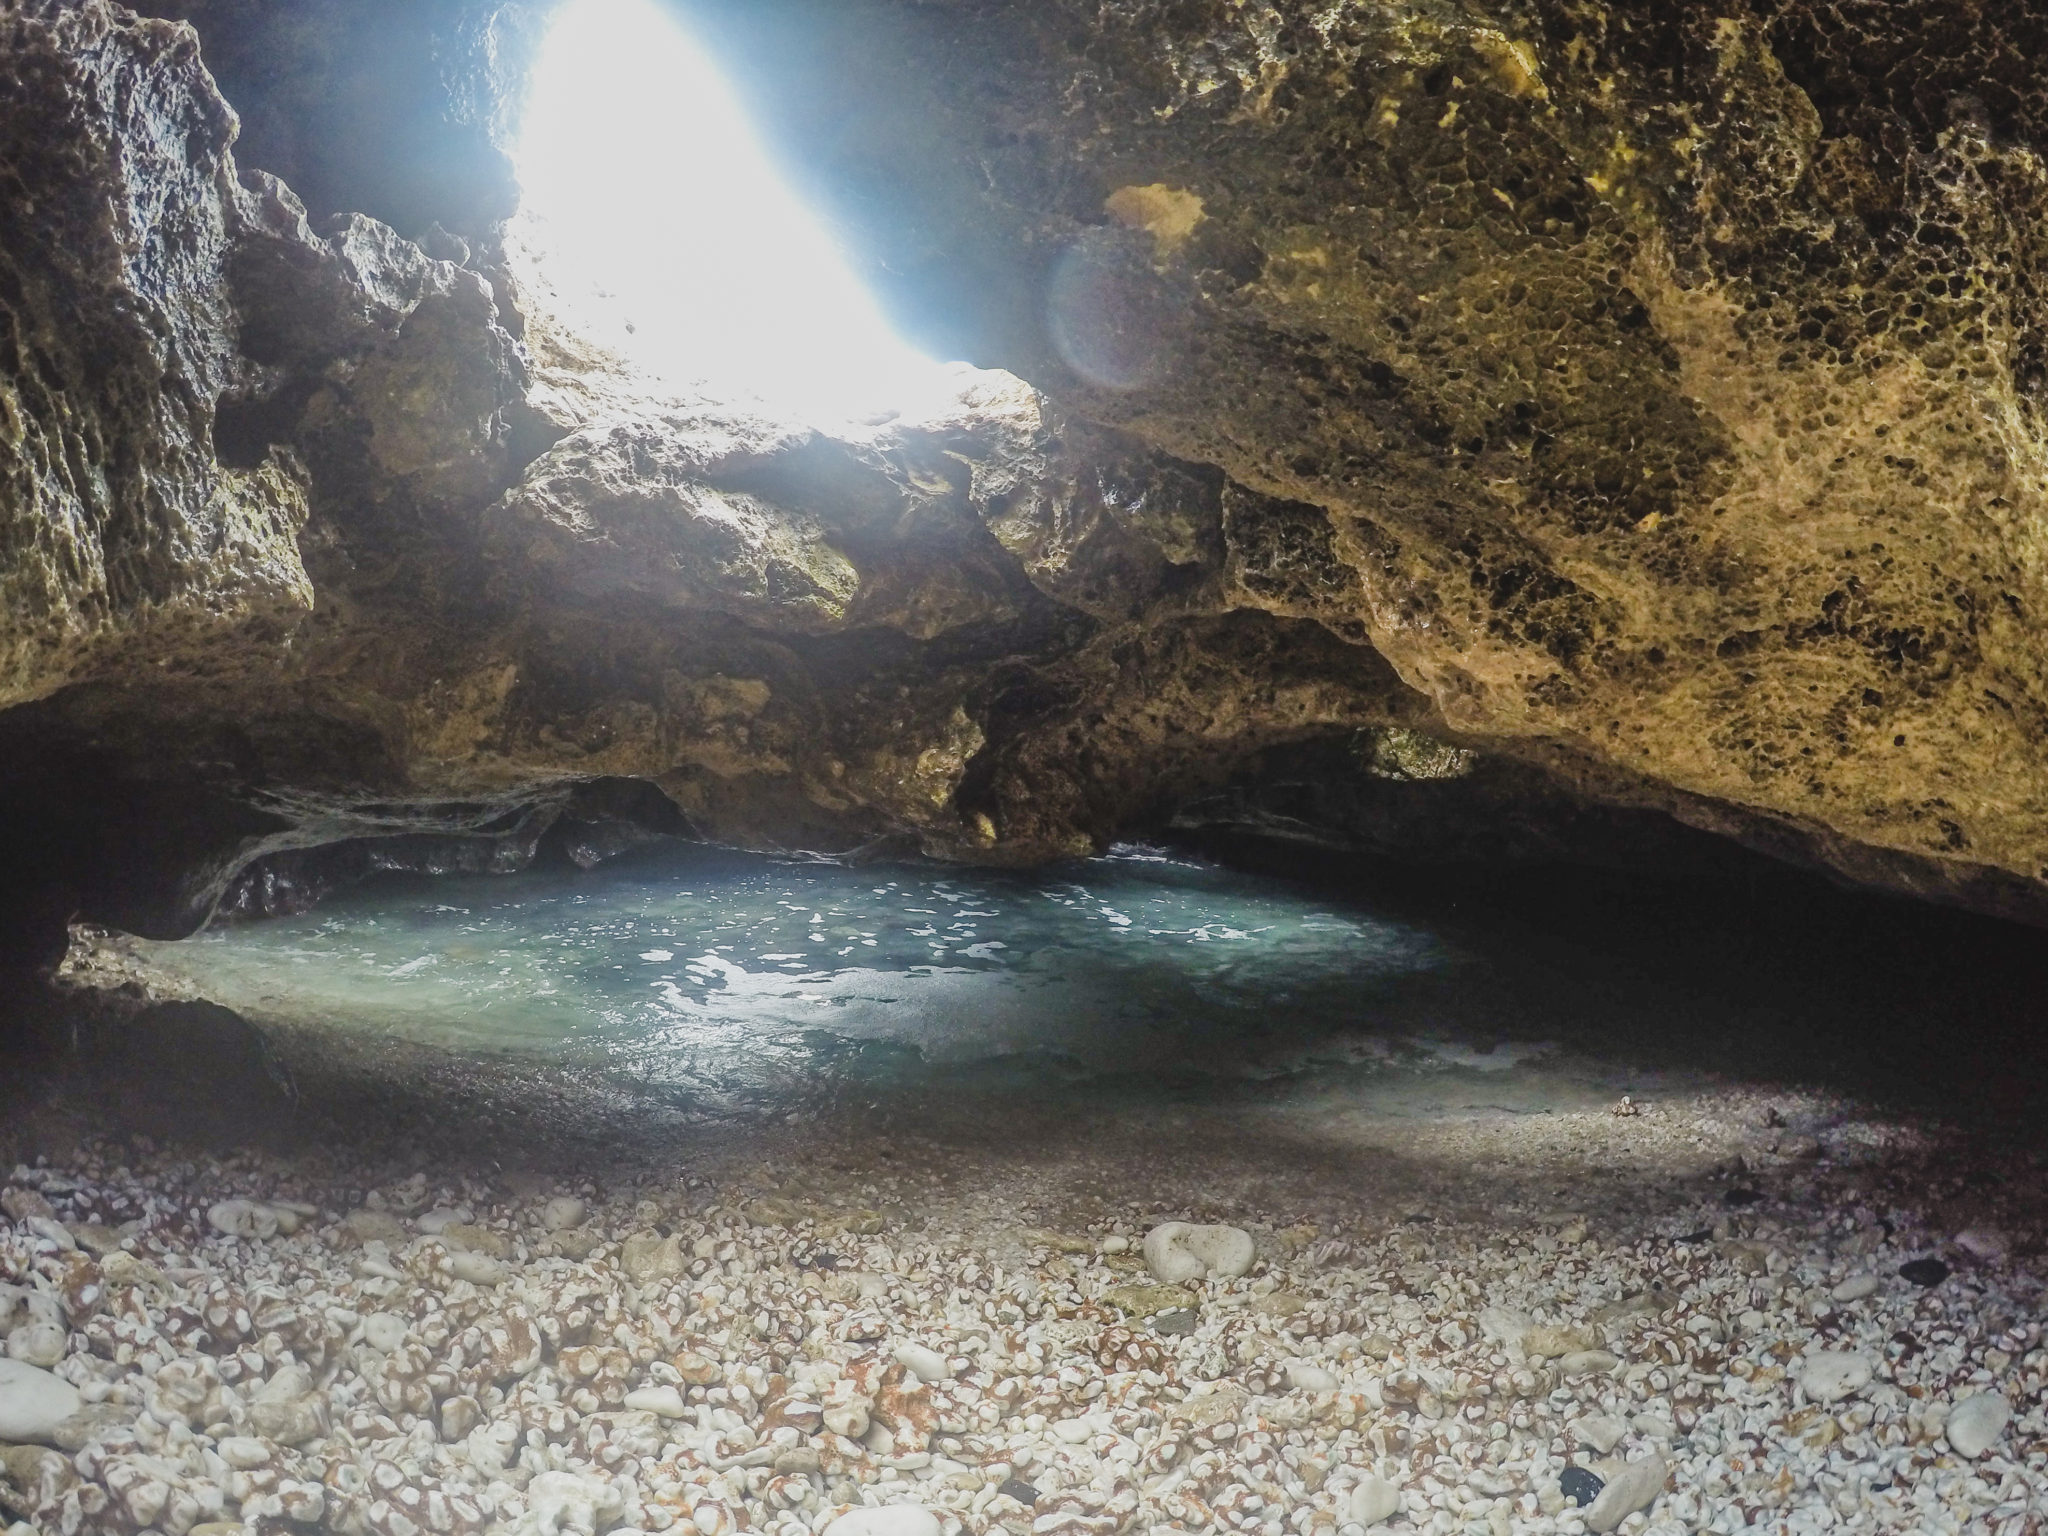 What You Should Know About The Secret Mermaid Cave On Oahu